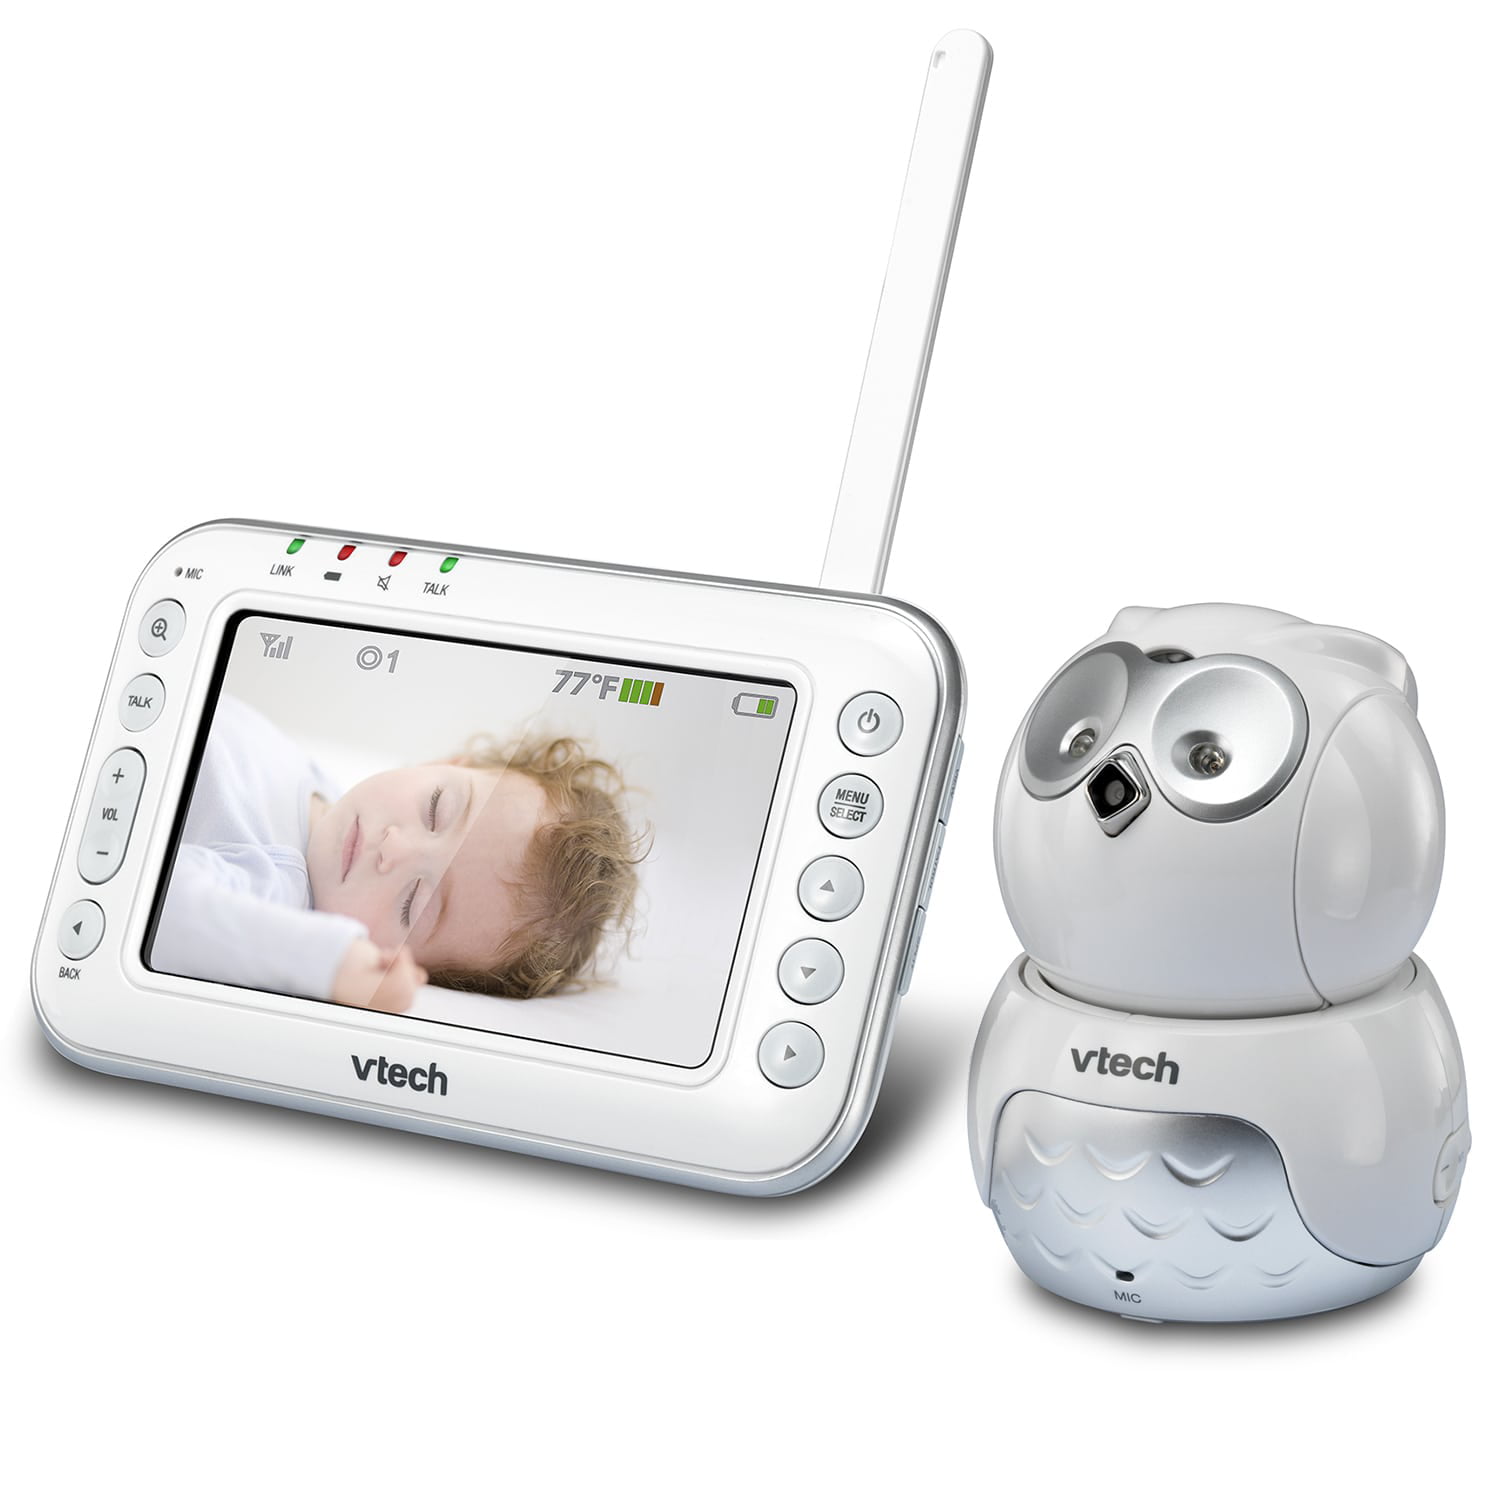 vtech expandable baby monitor